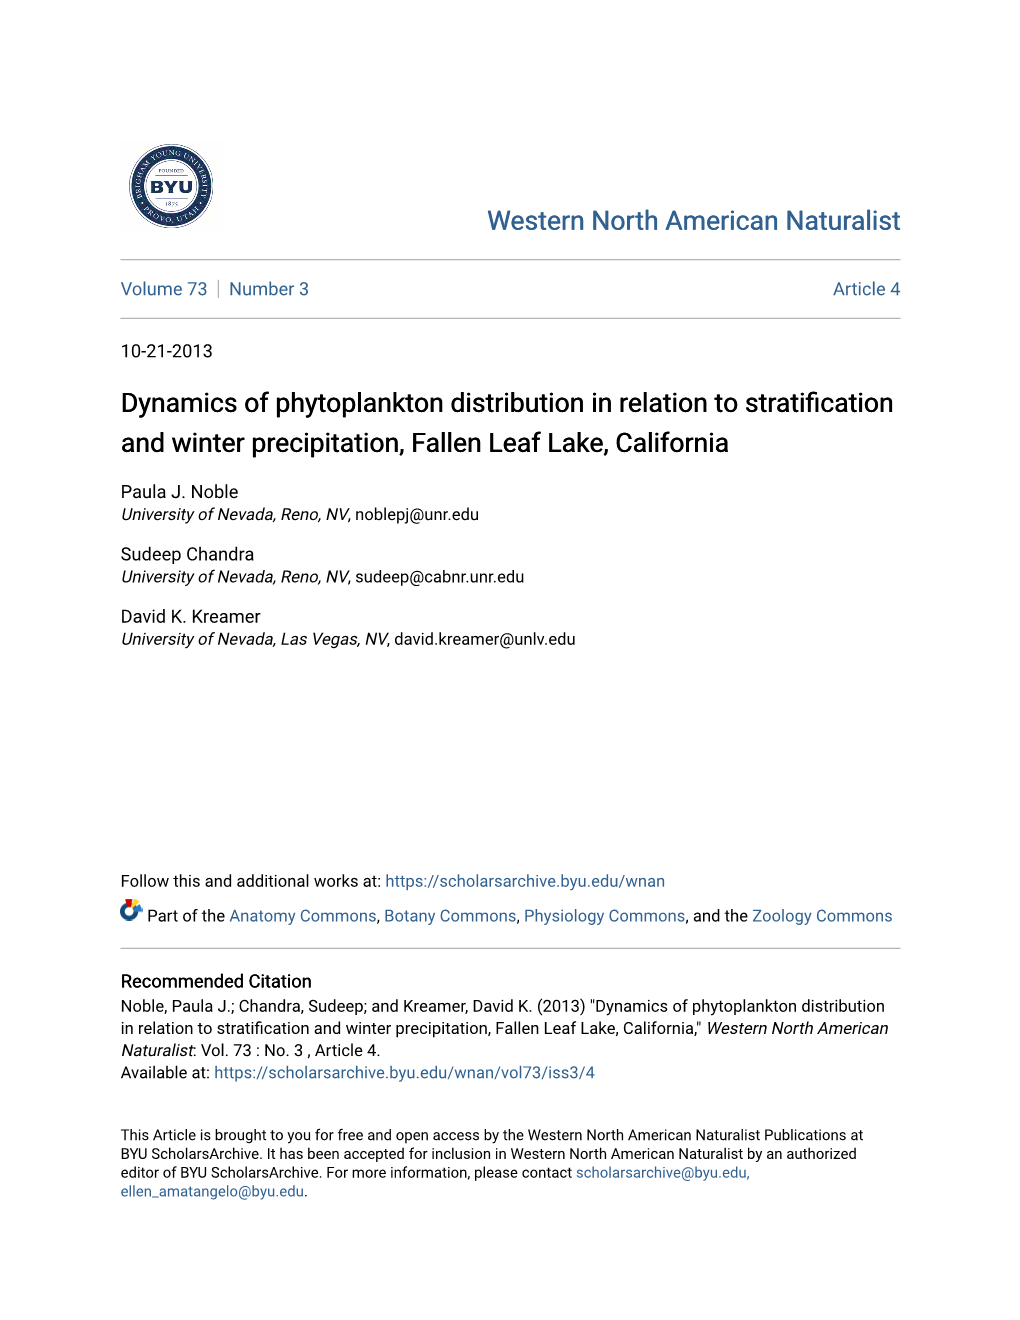 Dynamics of Phytoplankton Distribution in Relation to Stratification and Winter Precipitation, Fallen Leaf Lake, California